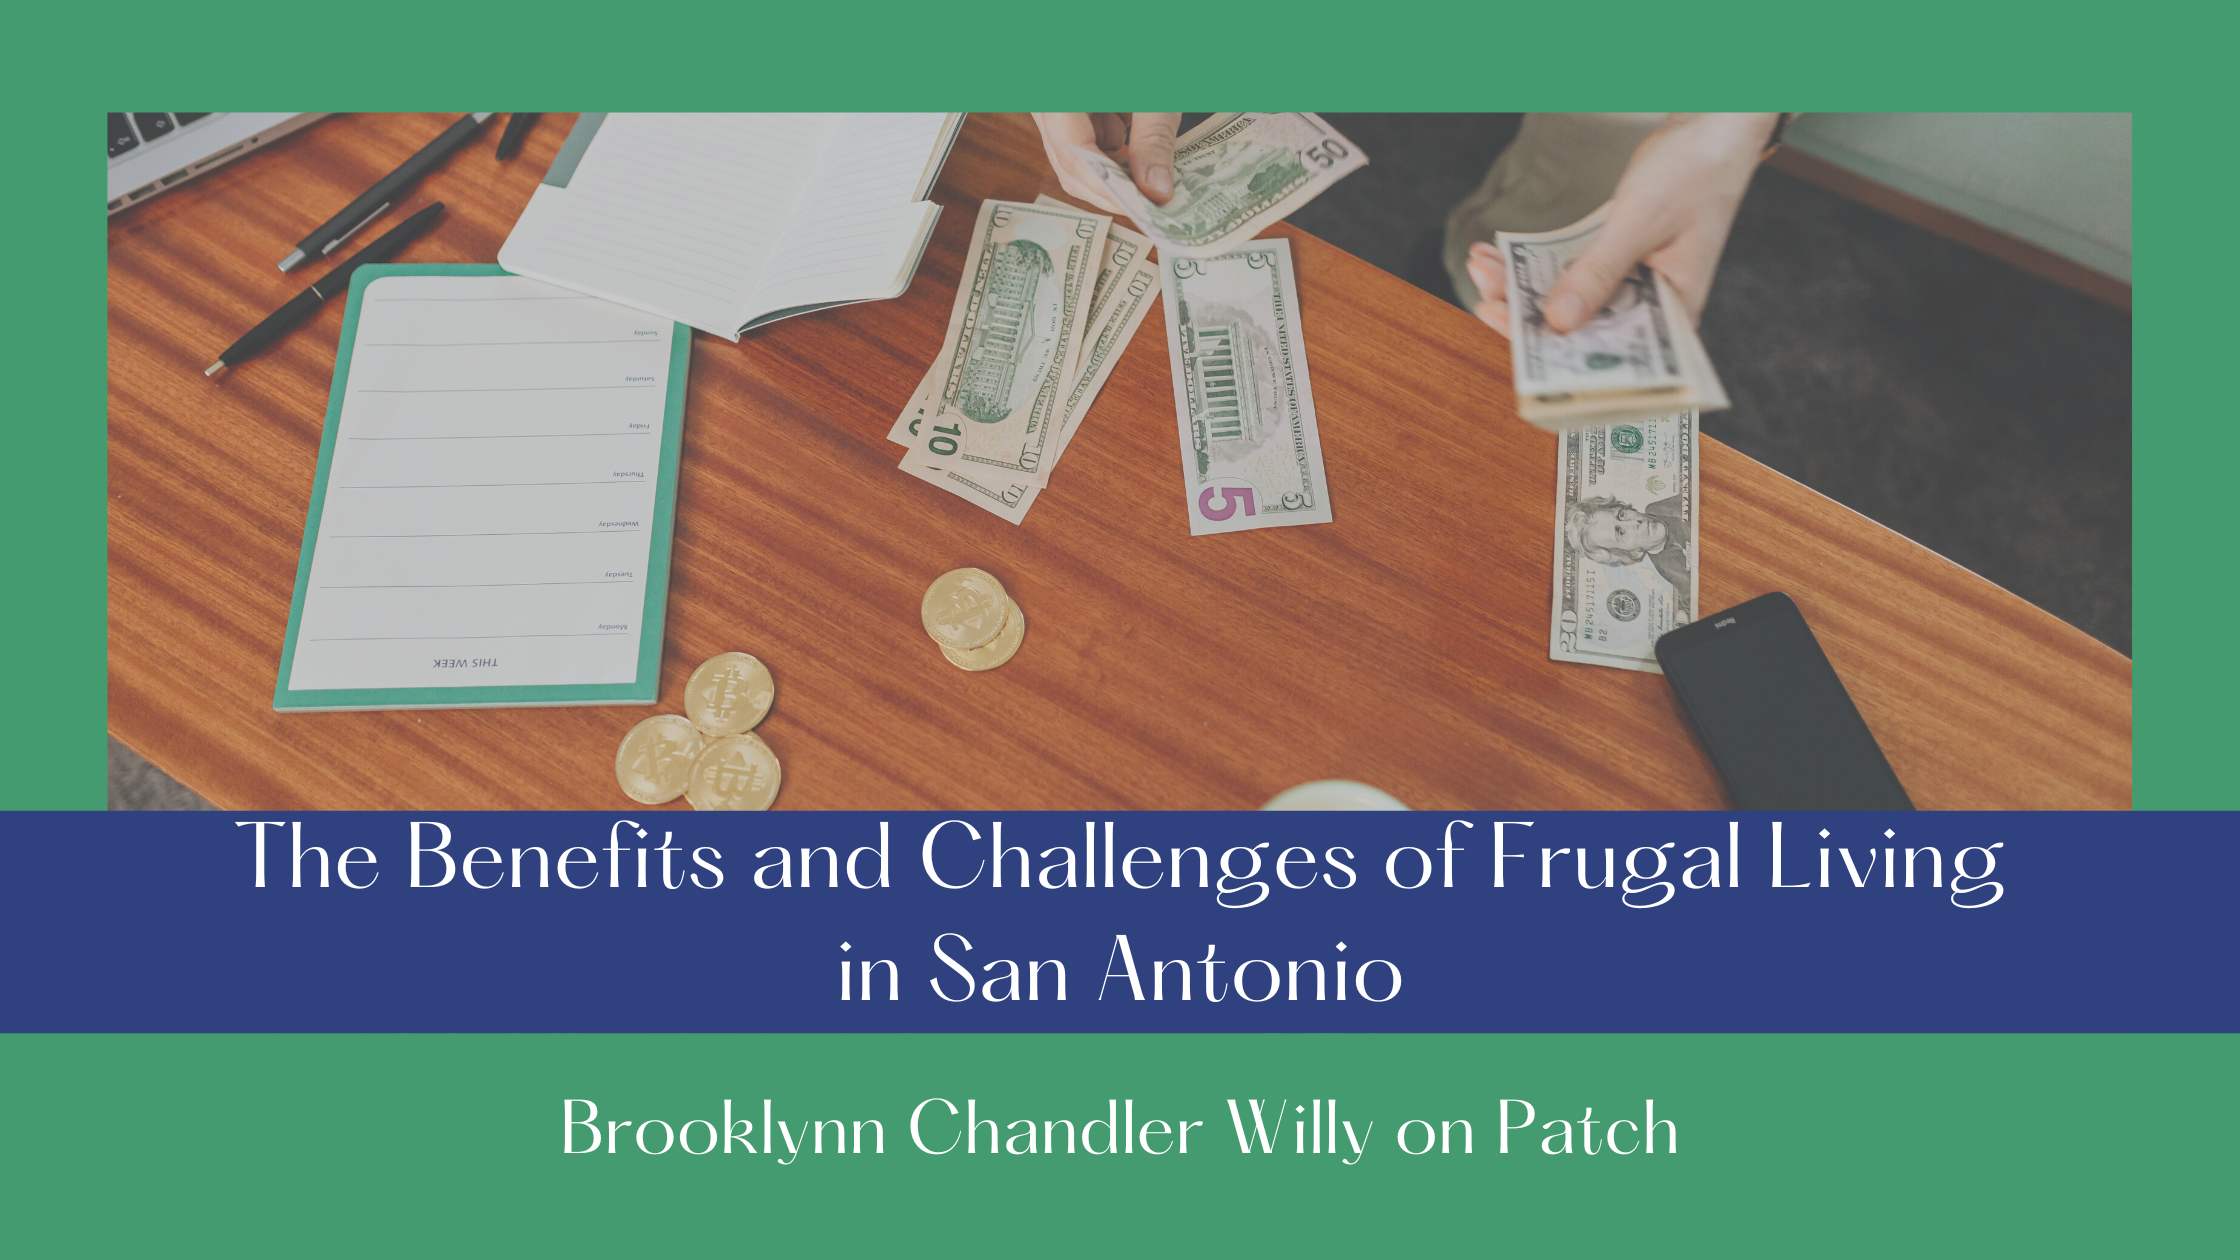 iy :
I'he Benetits and Challenges of Frugal Living
in San Antonio

Brooklvnn Chandler Willy on Patch